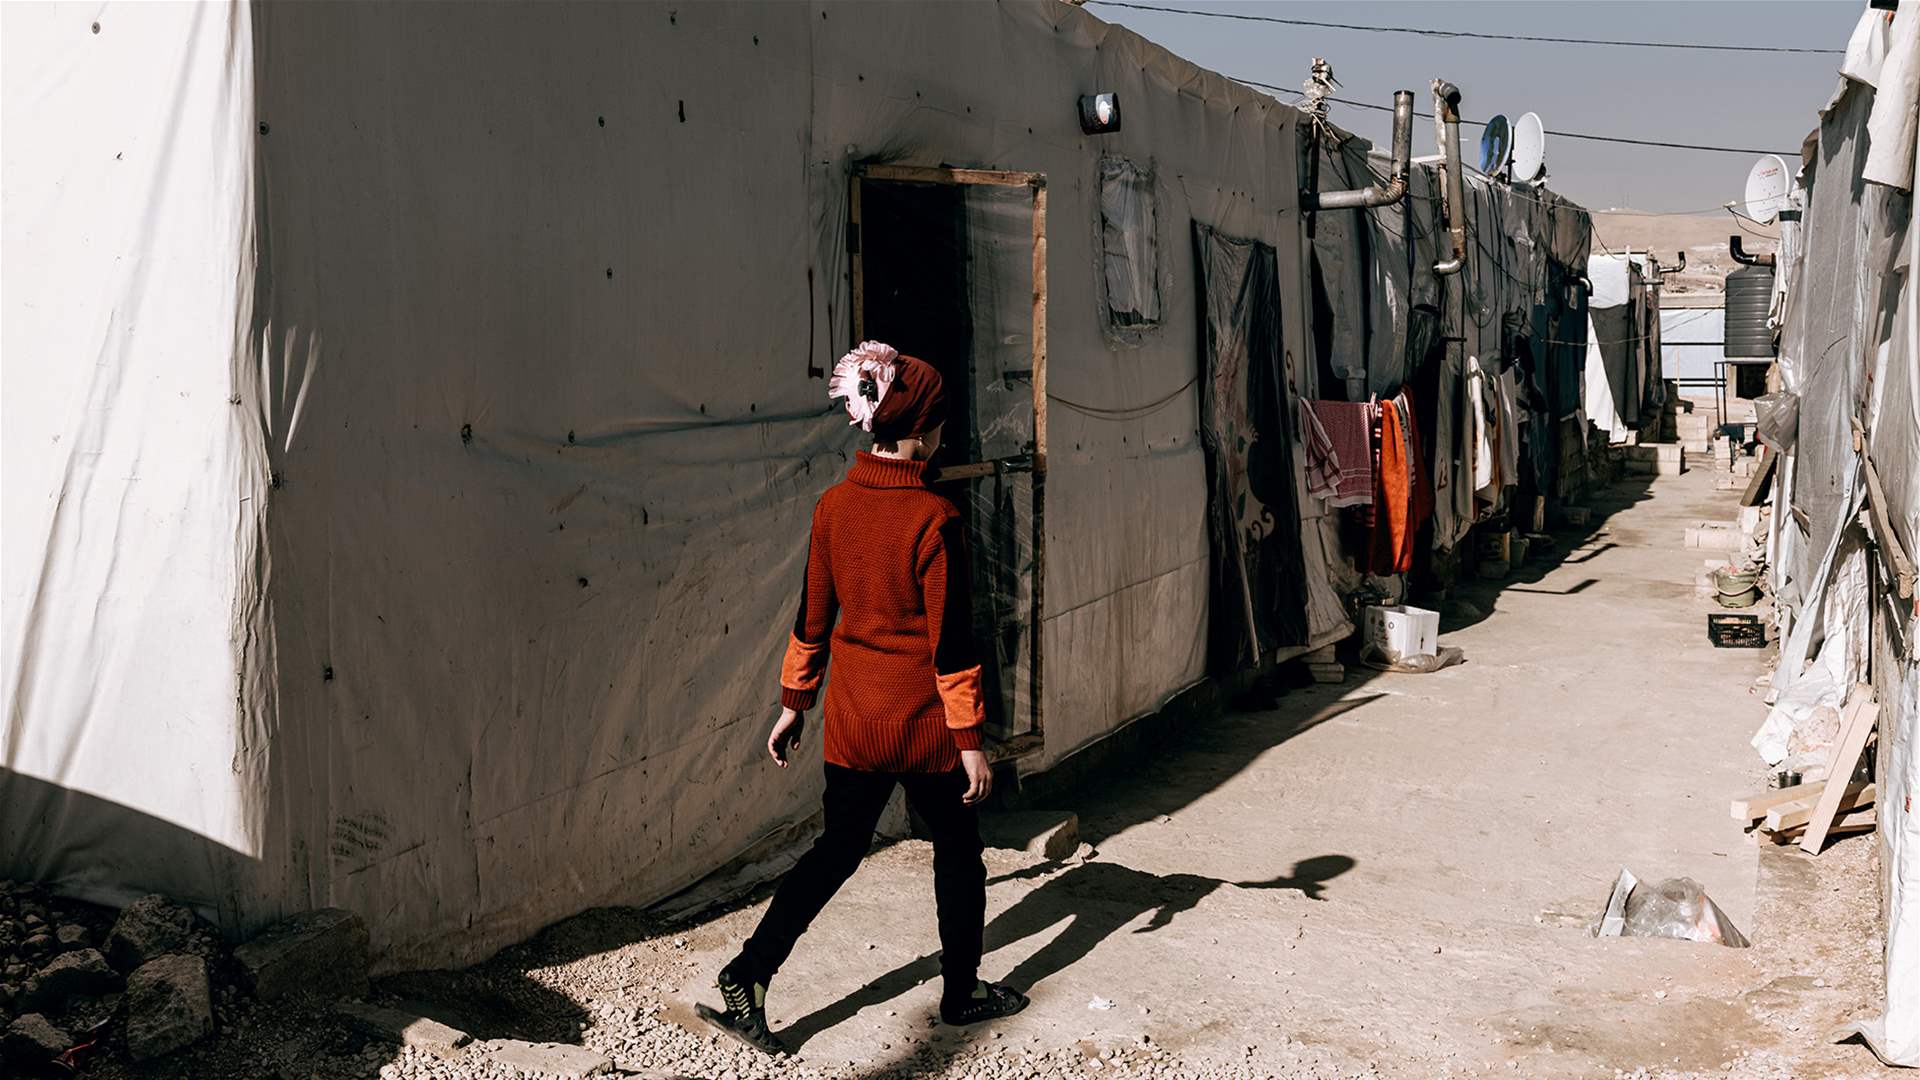 No roadmap for Syrian refugees: Maronite League warns of integration challenges